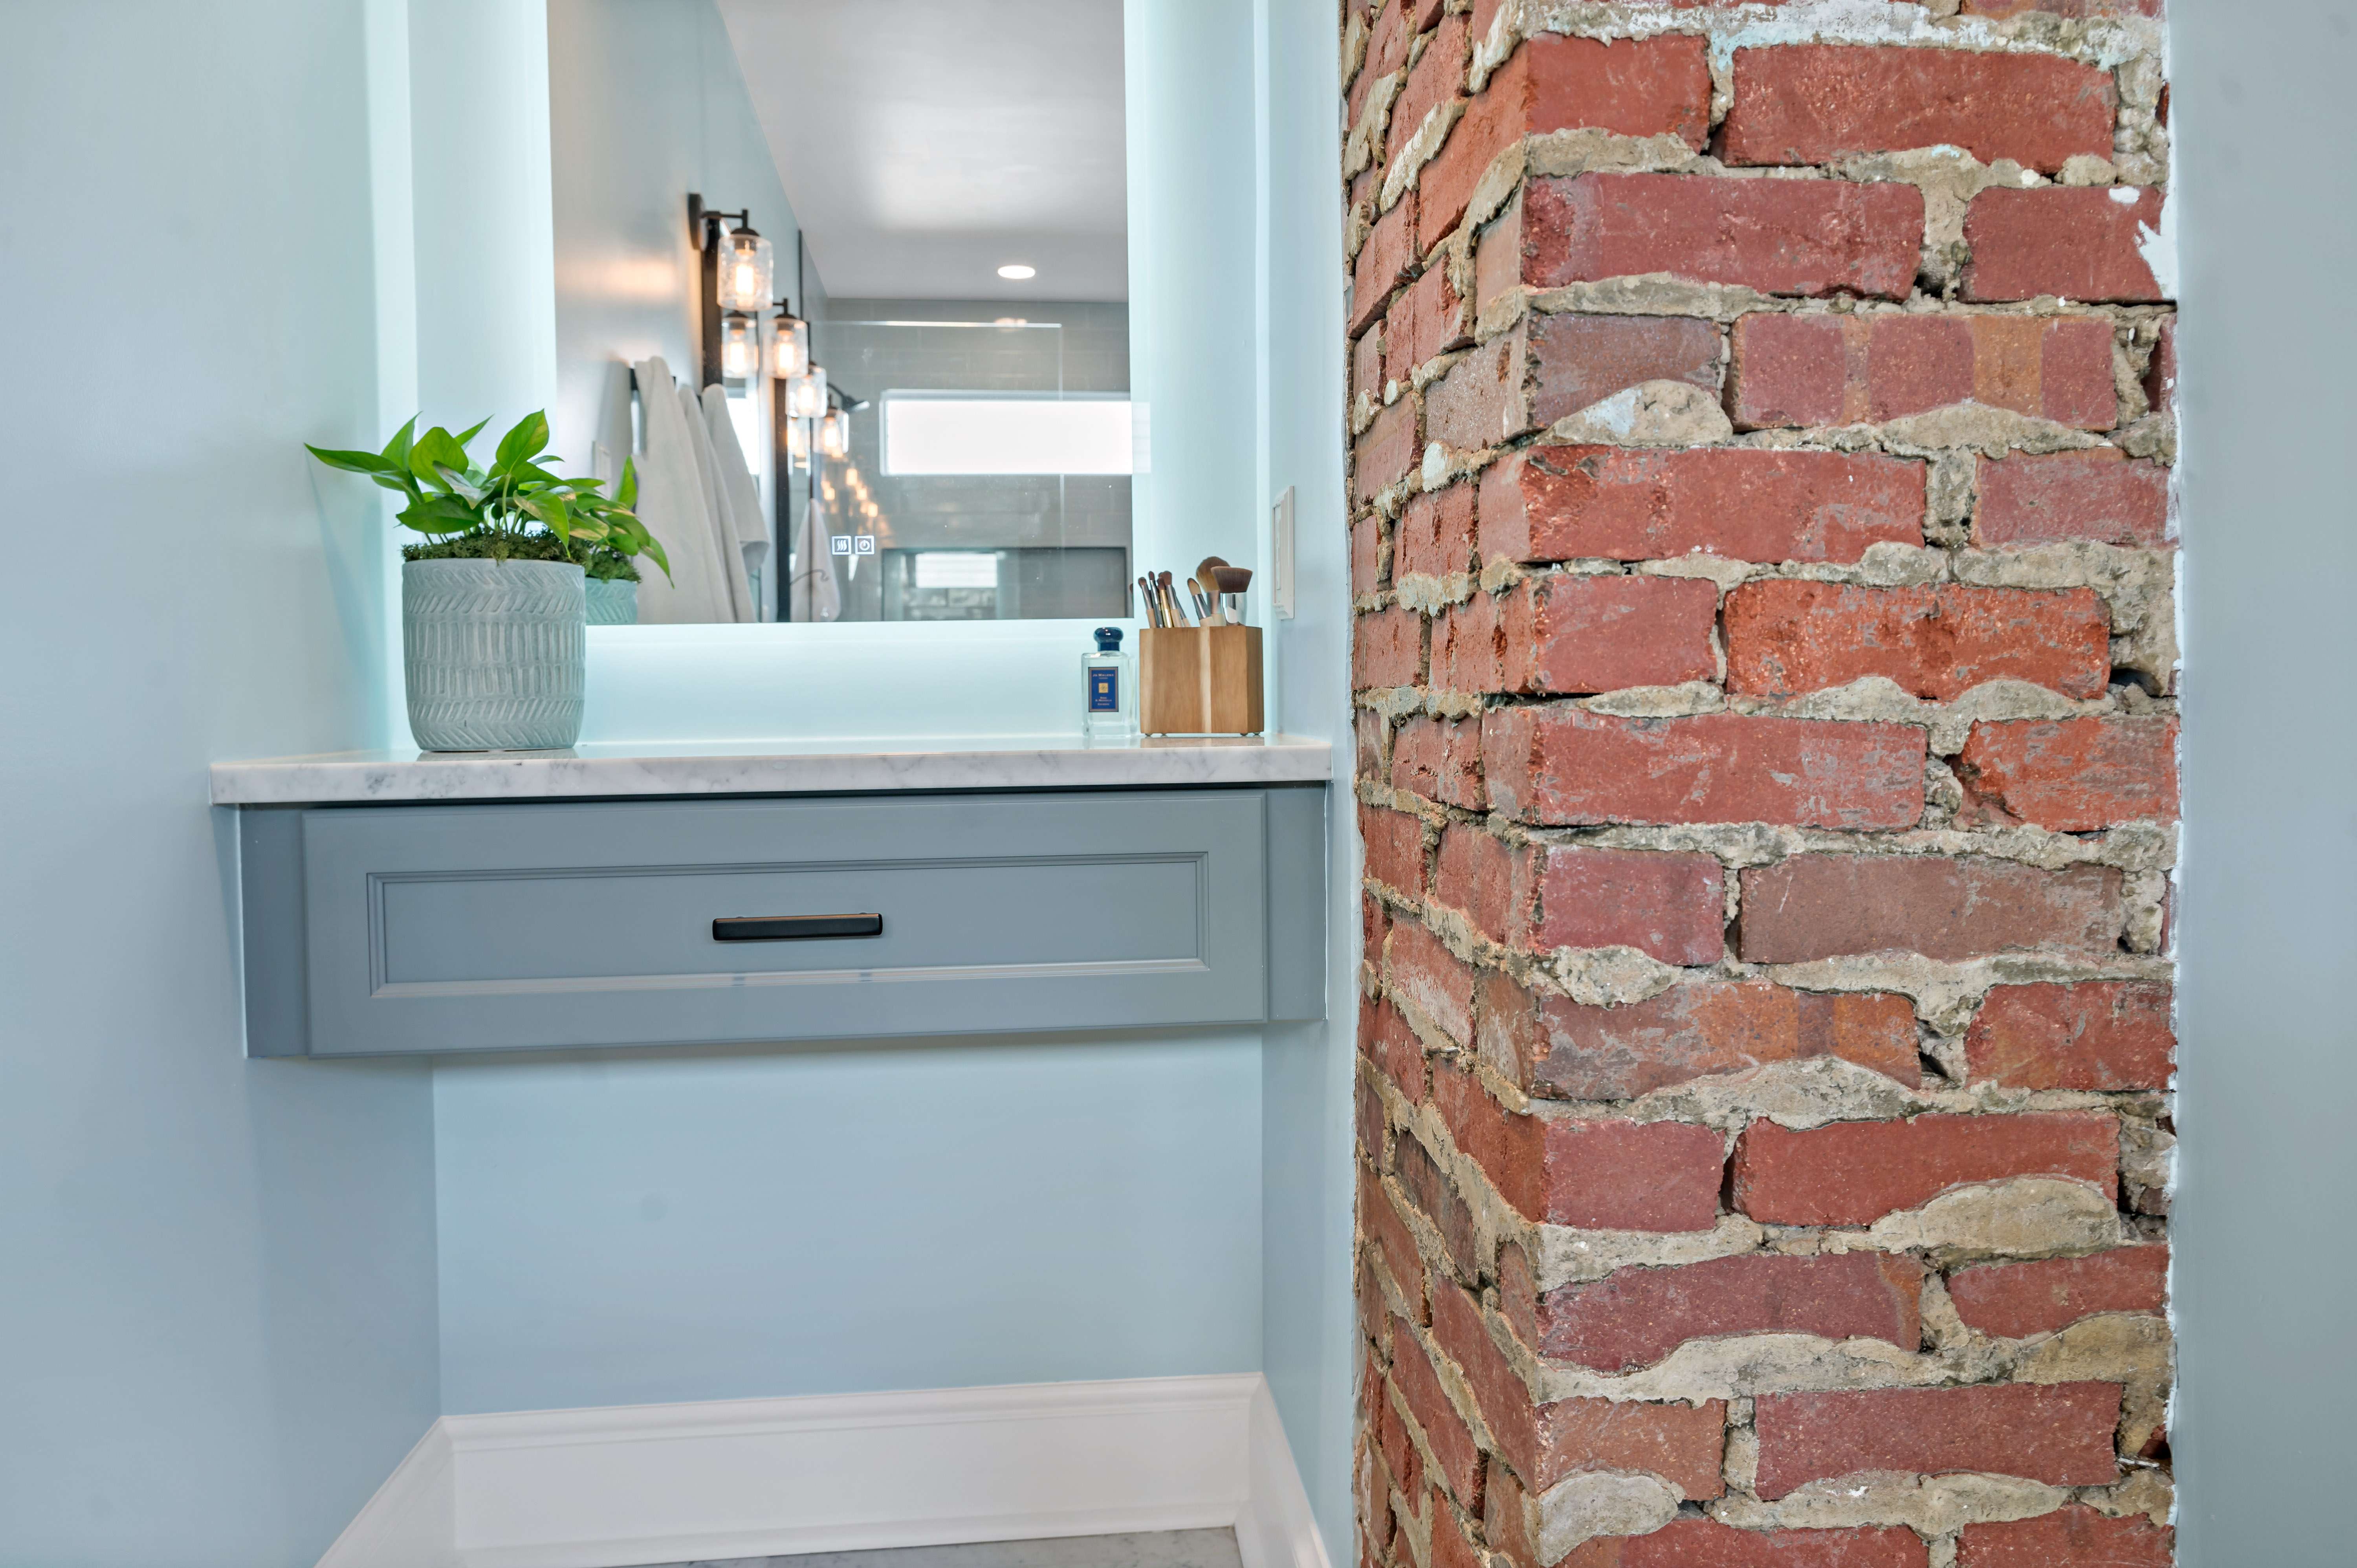 Small vanity area in bathroom with exposed brick